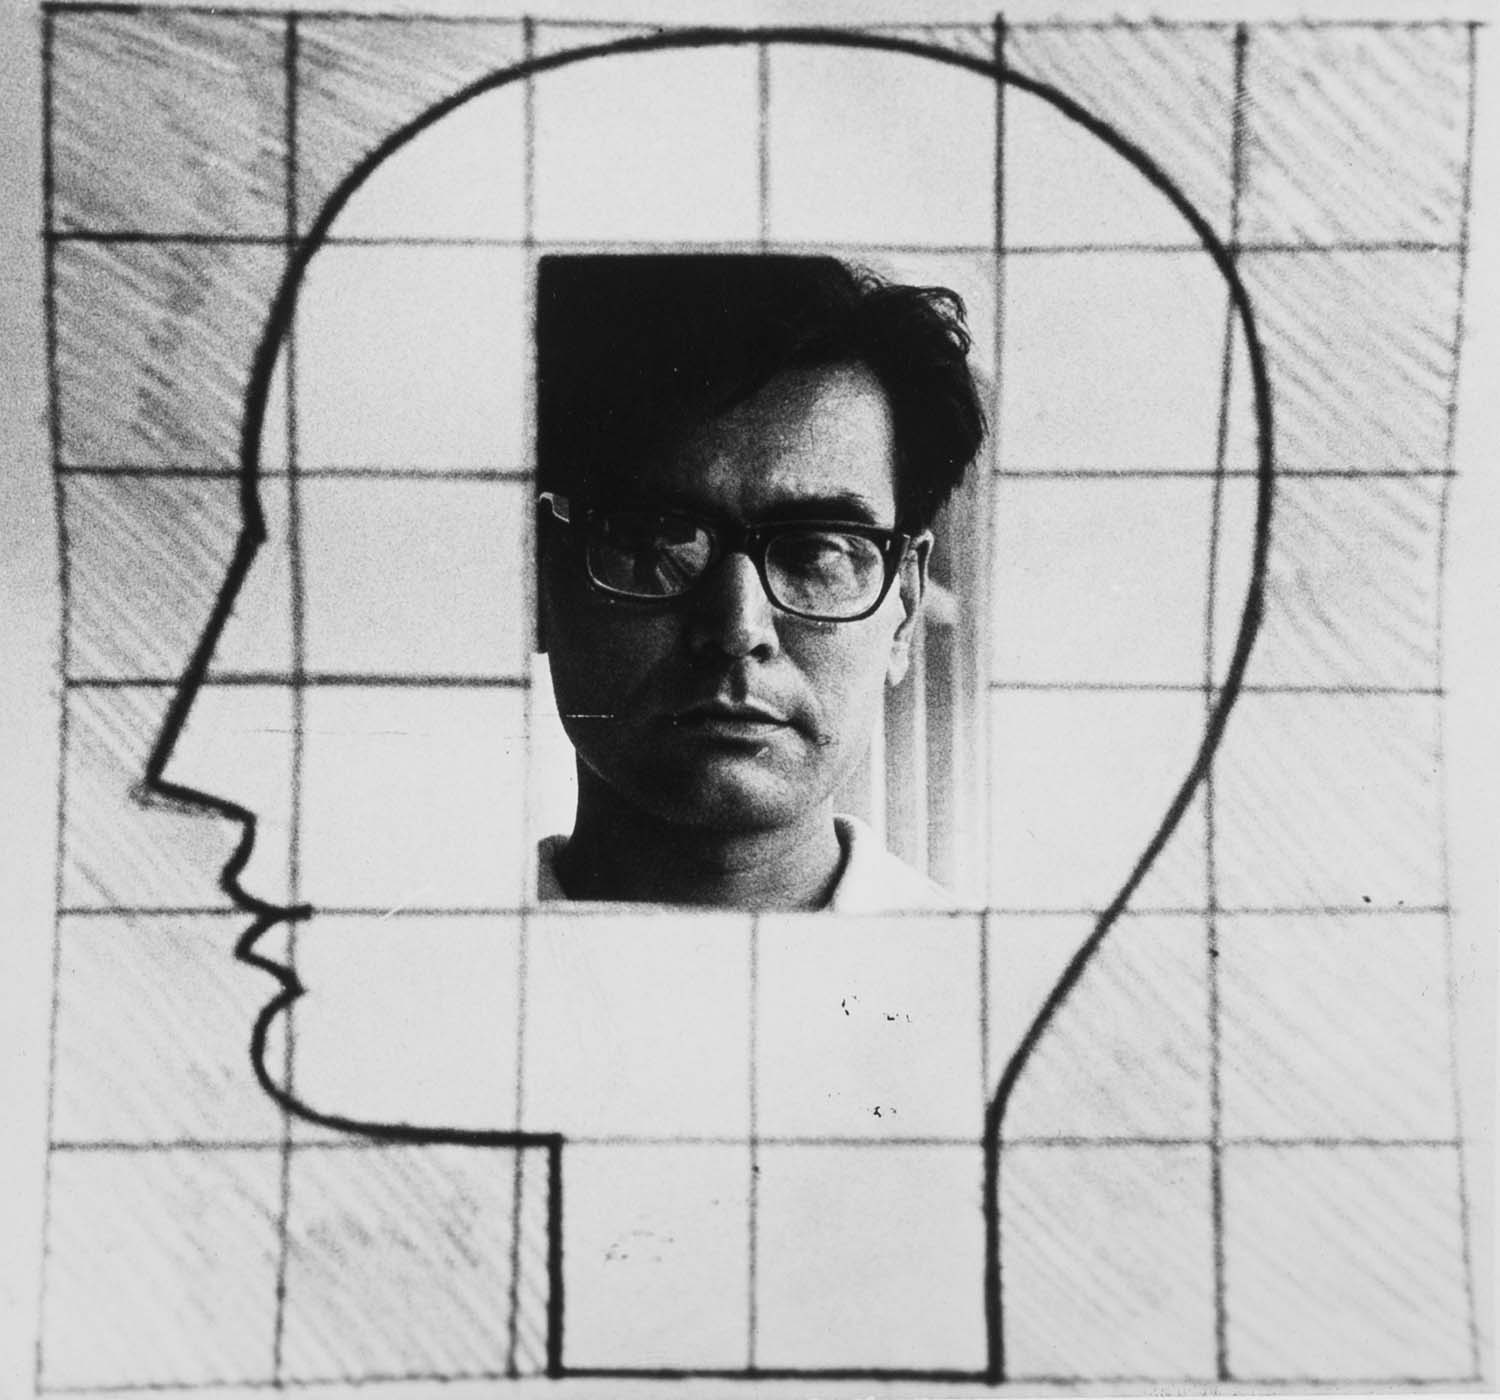 A photographed self-portrait of the artist inside a line drawing of a human head in profile, drawn over a grid on paper.